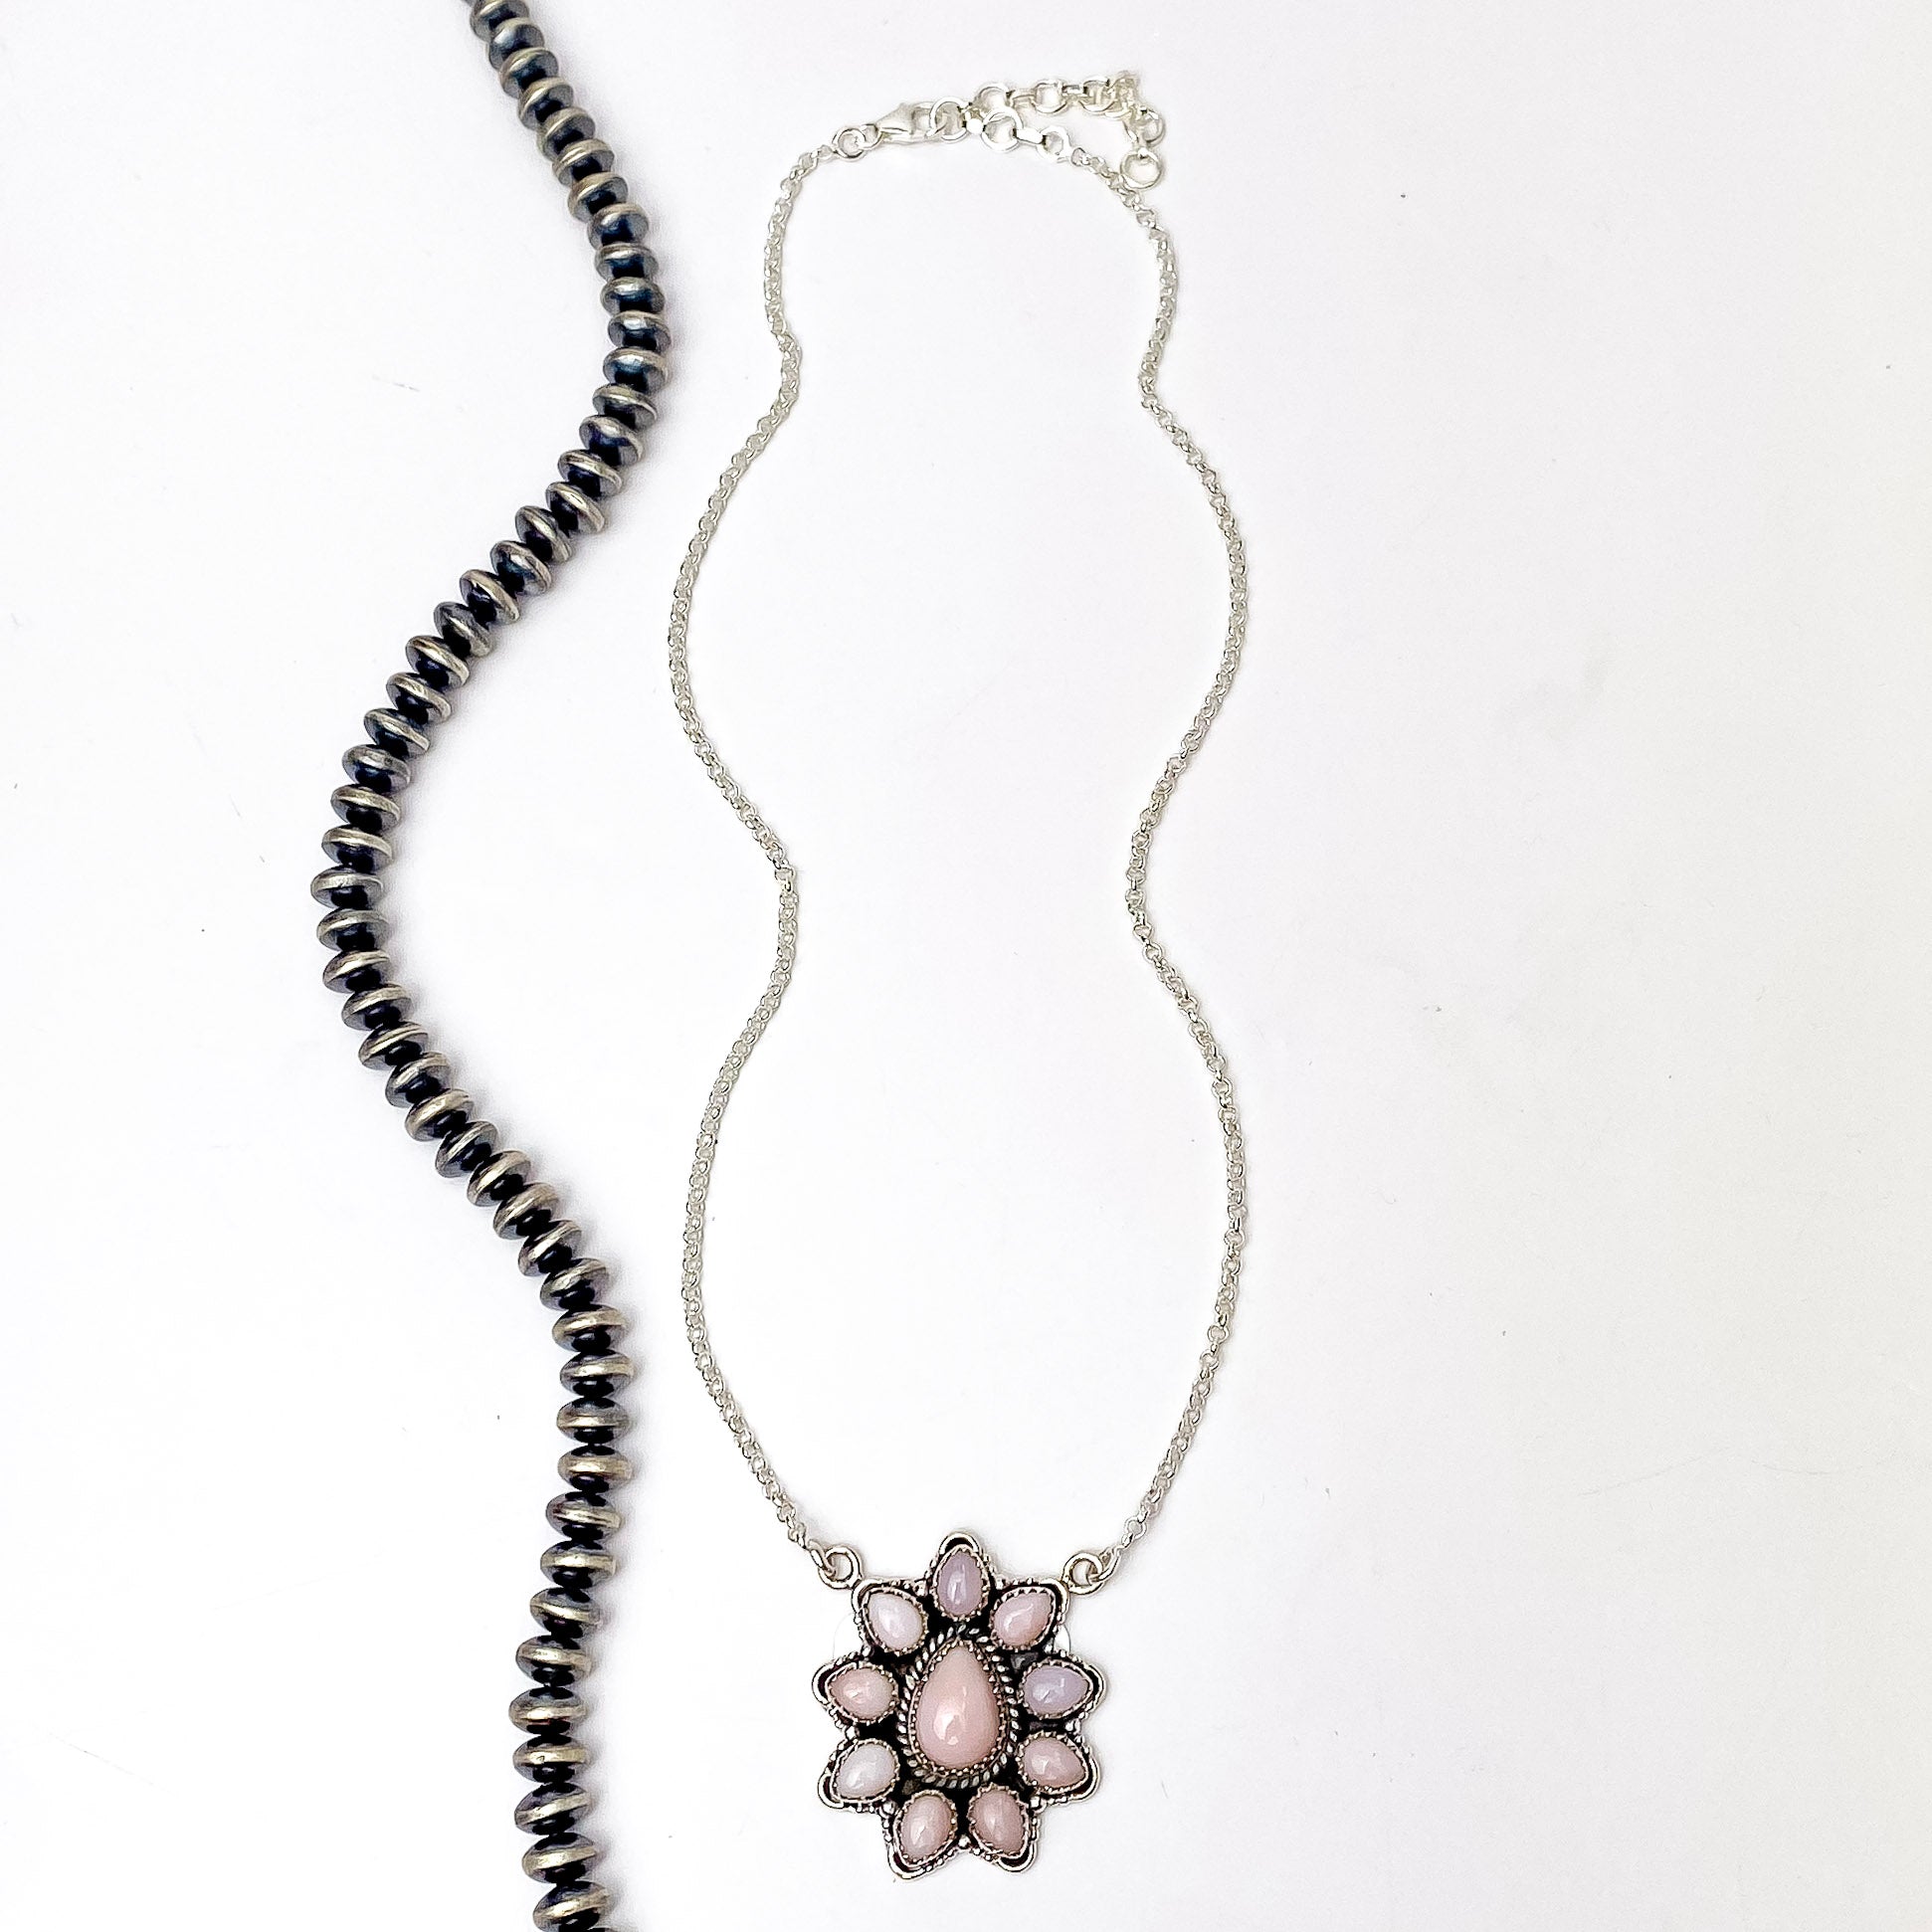 Hada Collection | Handmade Sterling Silver Necklace with Pink Opal Cluster Pendant - Giddy Up Glamour Boutique